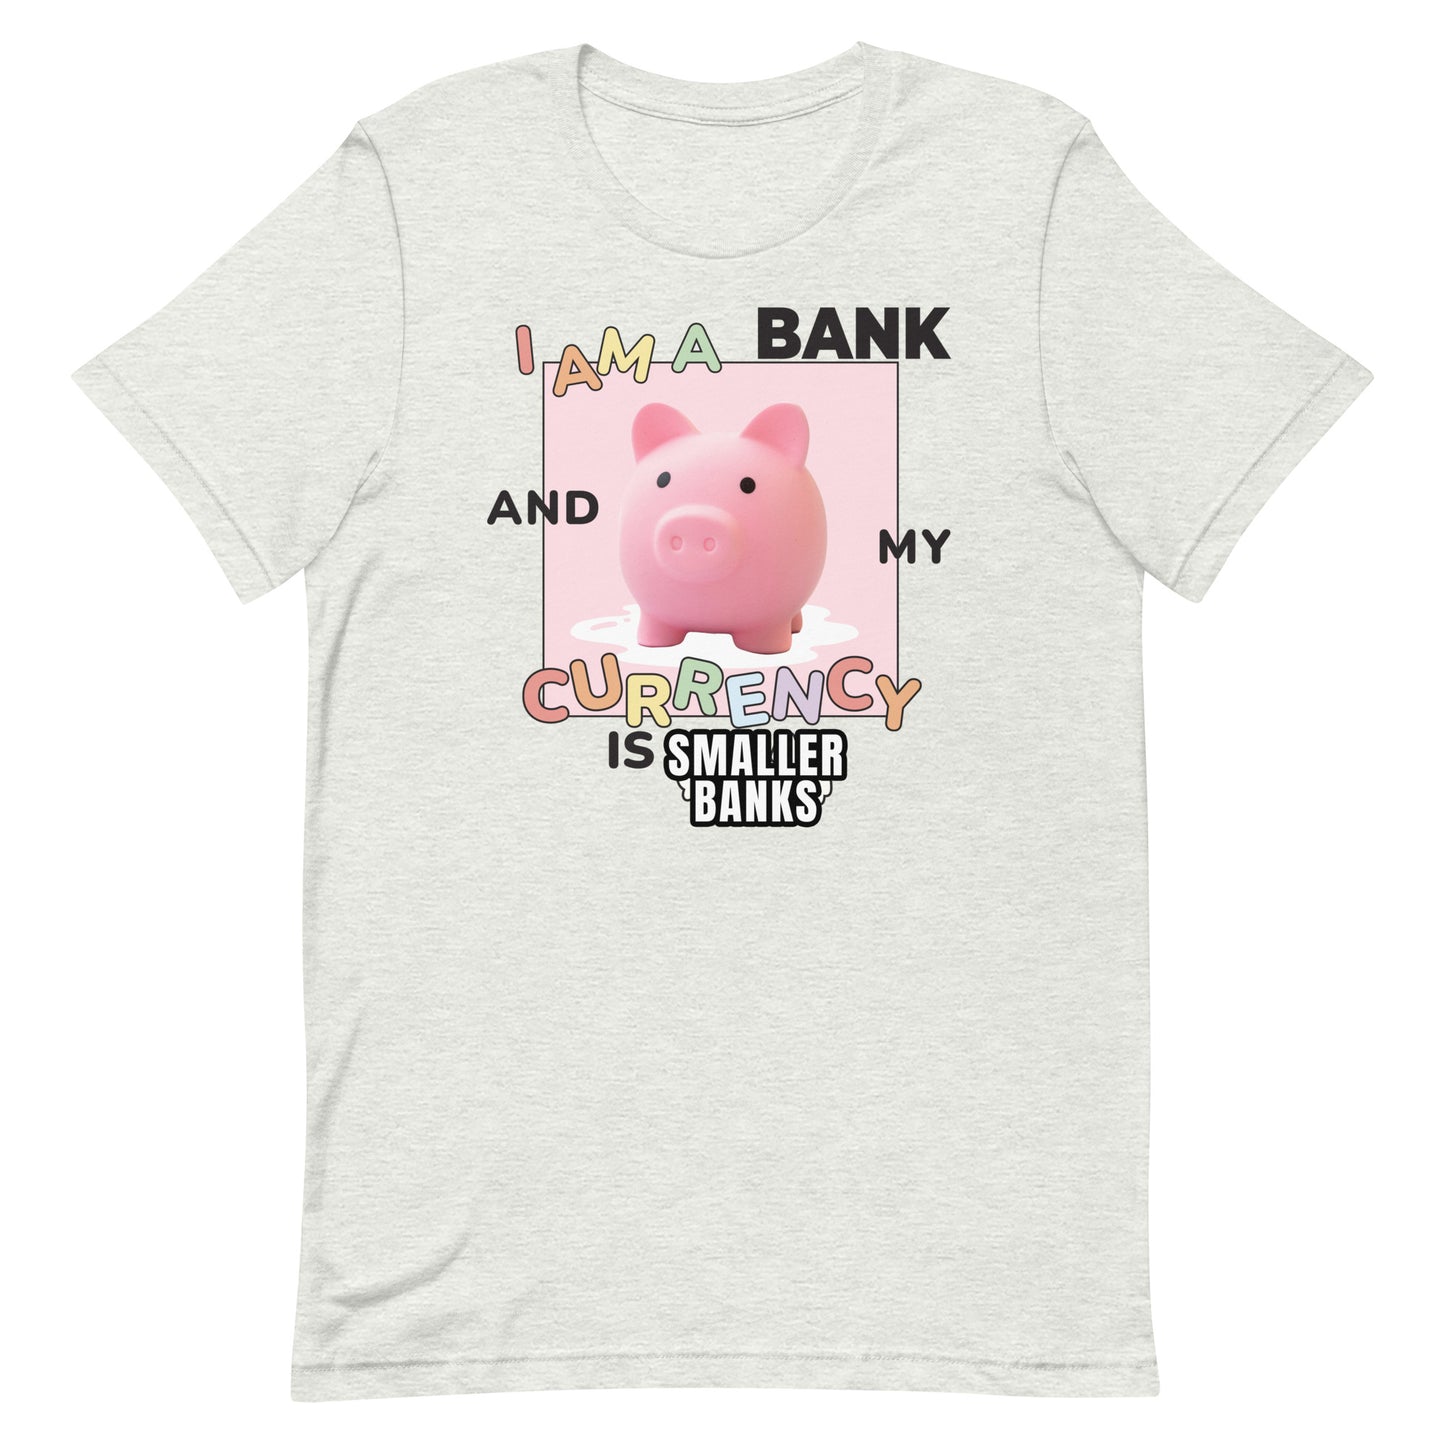 I Am a Bank and My Currency is [SMALLER BANKS] Unisex t-shirt